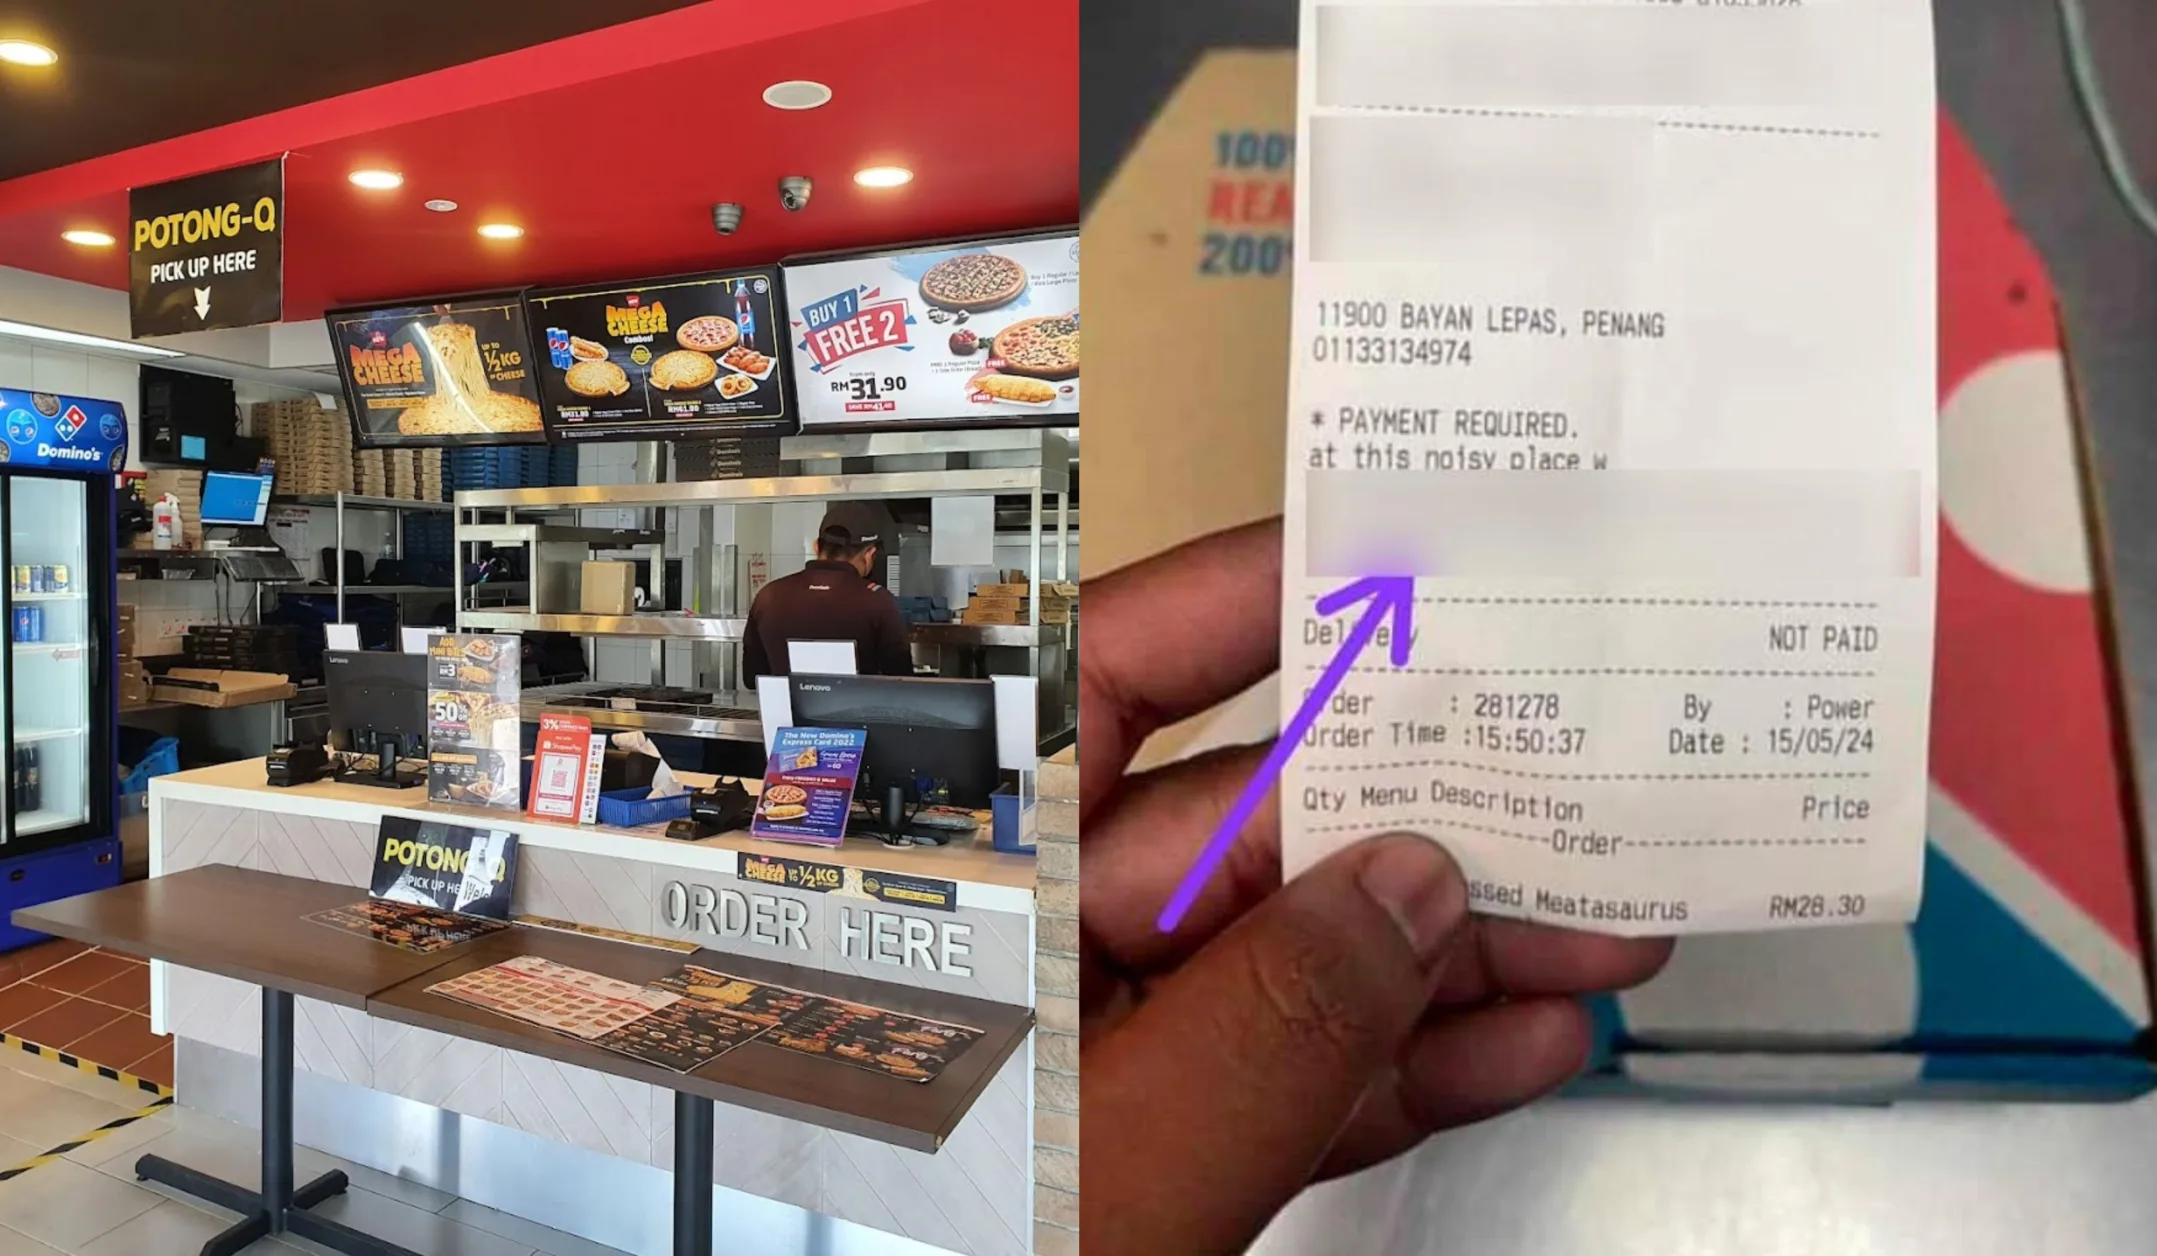 Domino’s Malaysia Gives Receipt Insulting Islam